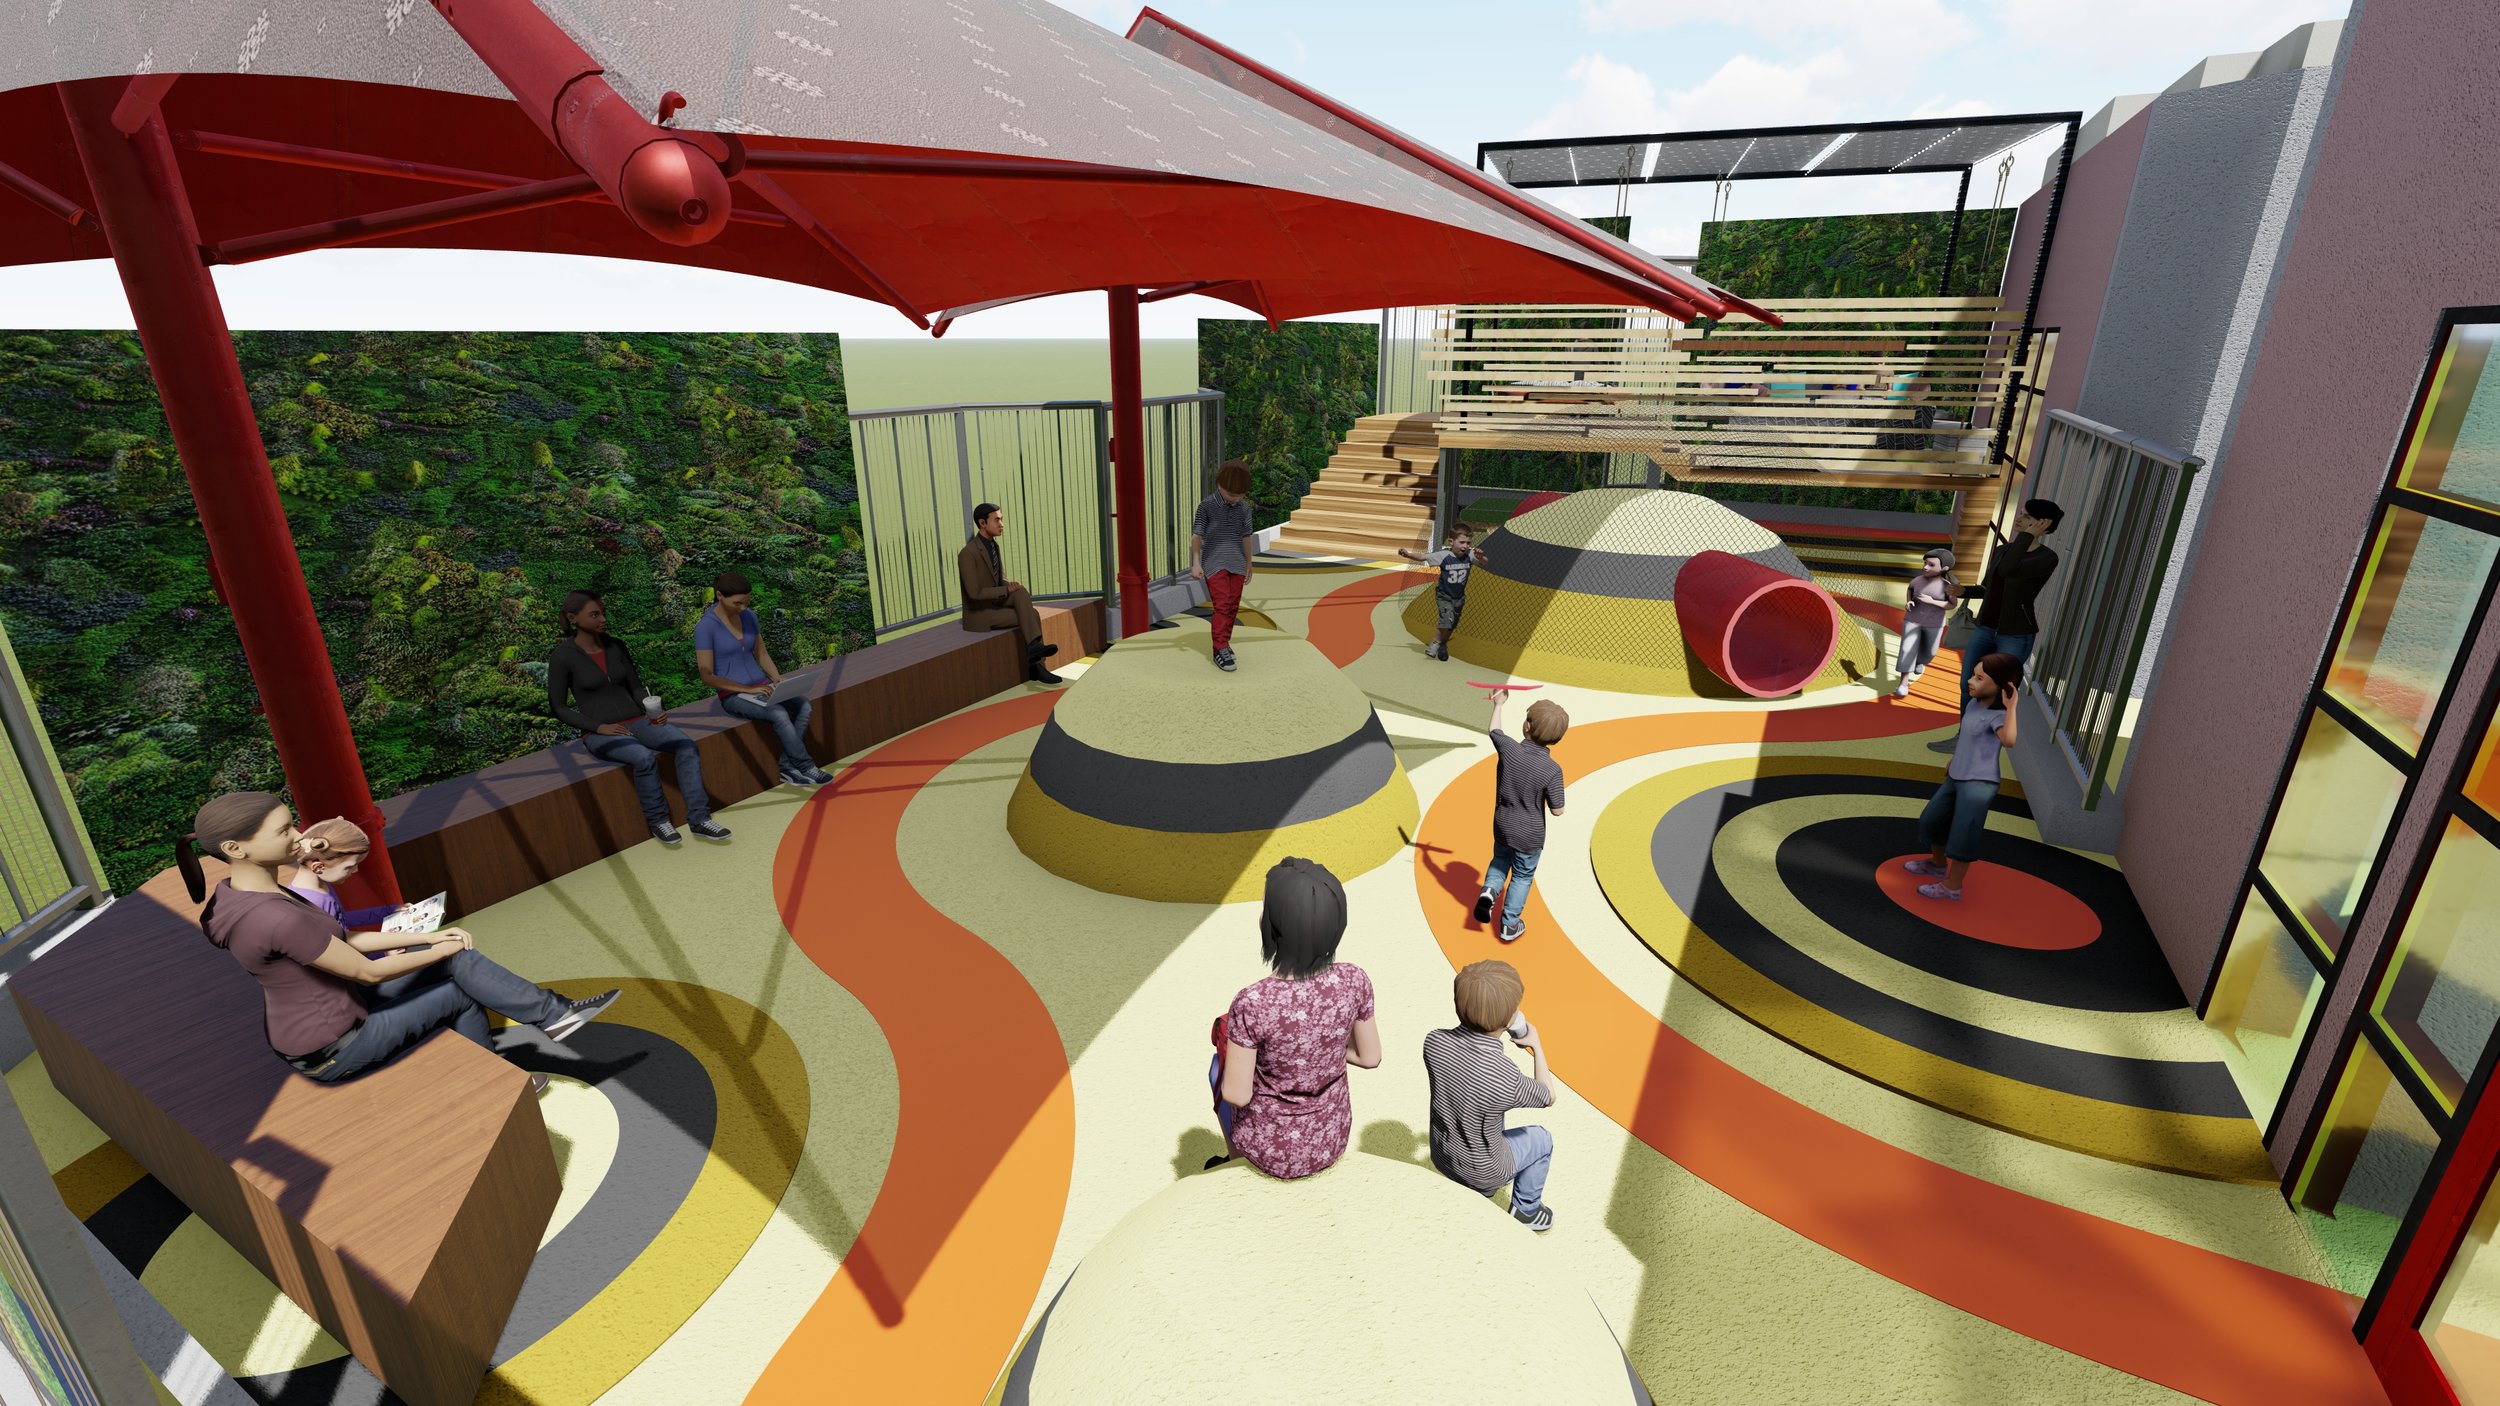 St. Jude Research Hospital Play Area Deck